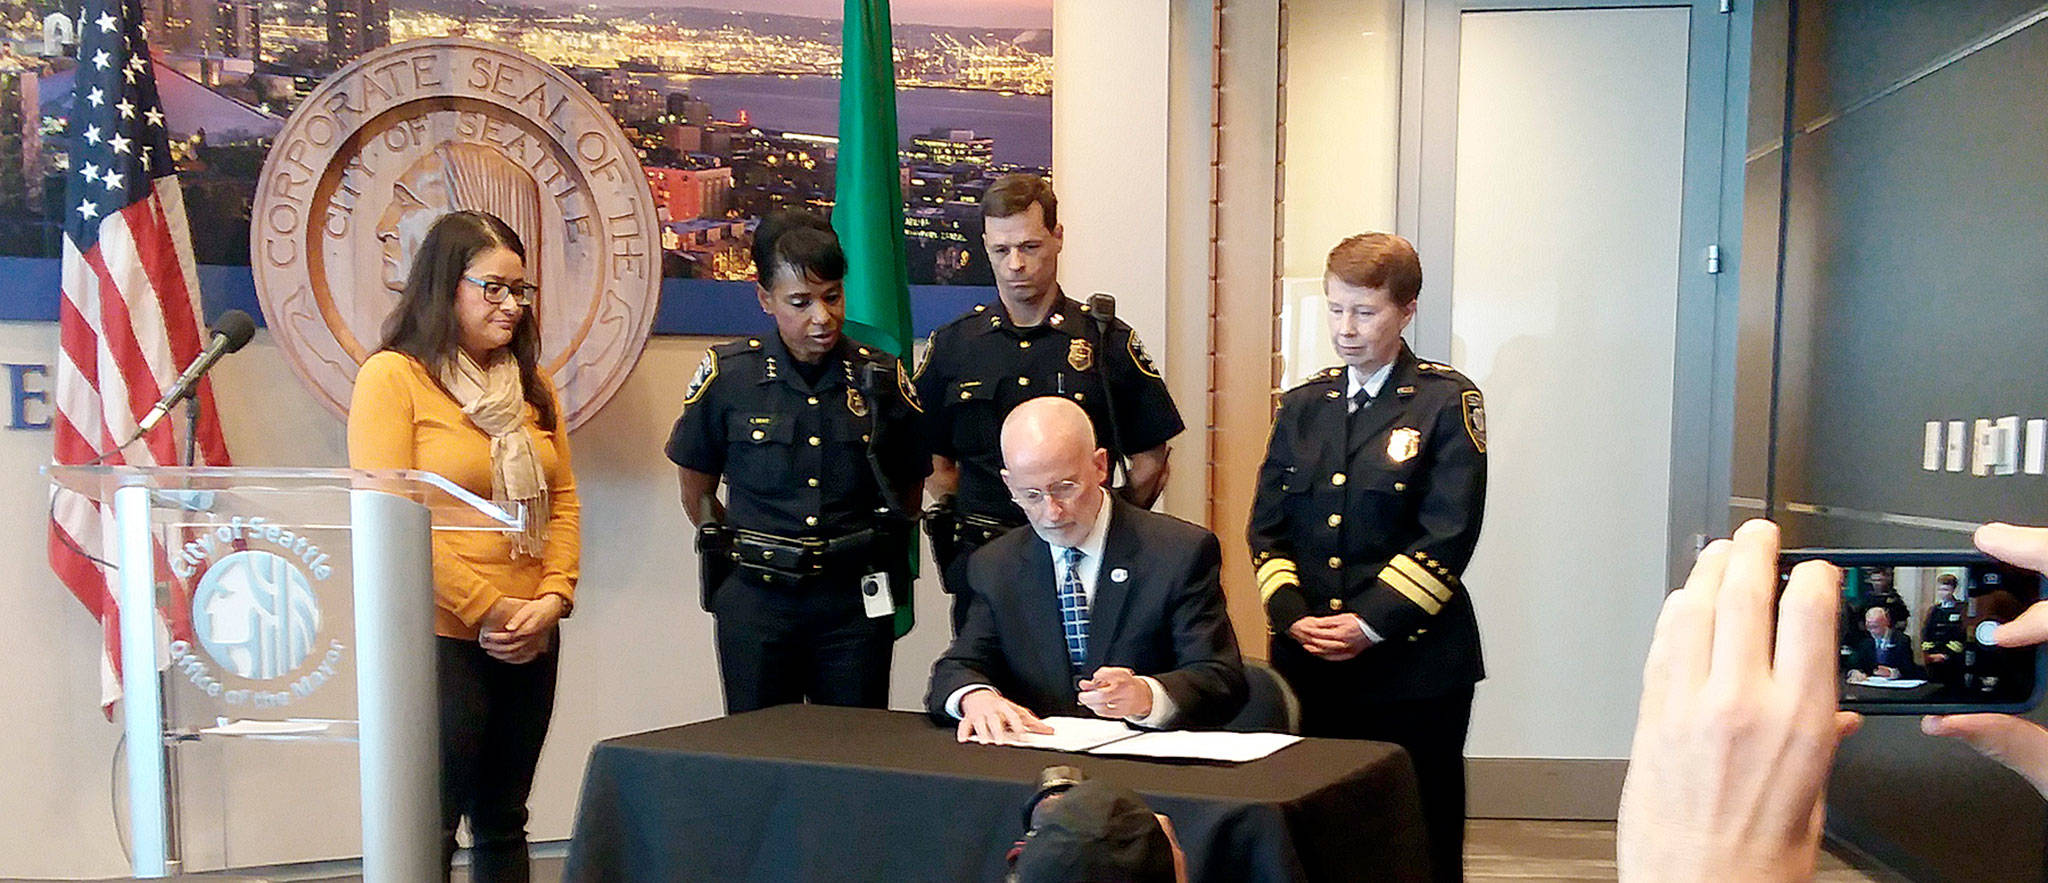 Mayor Tim Burgess signs the executive order on Wednesday to limit and begin further reform of moonlighting by Seattle police, flanked by Councilmember M. Lorena González (left) and the SPD command staff.